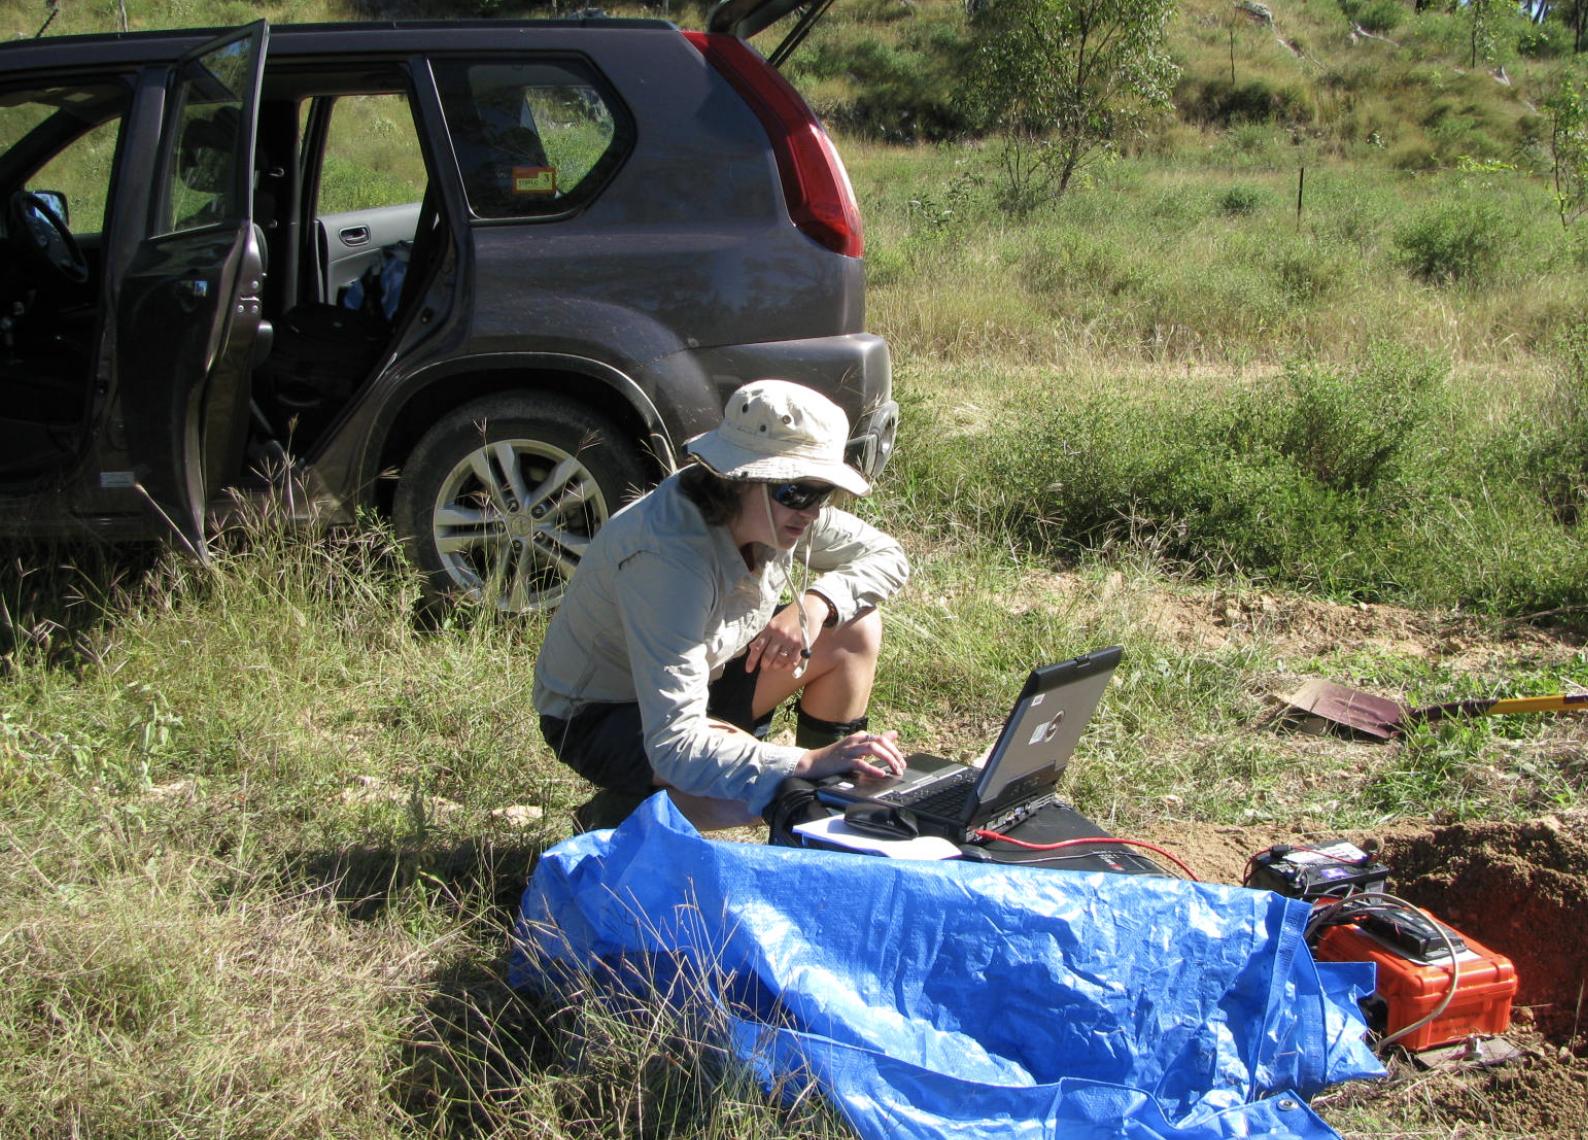 A Geoscience Australia seismologist deploys a temporary seismometer after the Bowen quake. More than 300 aftershocks were recorded in the aftermath. 